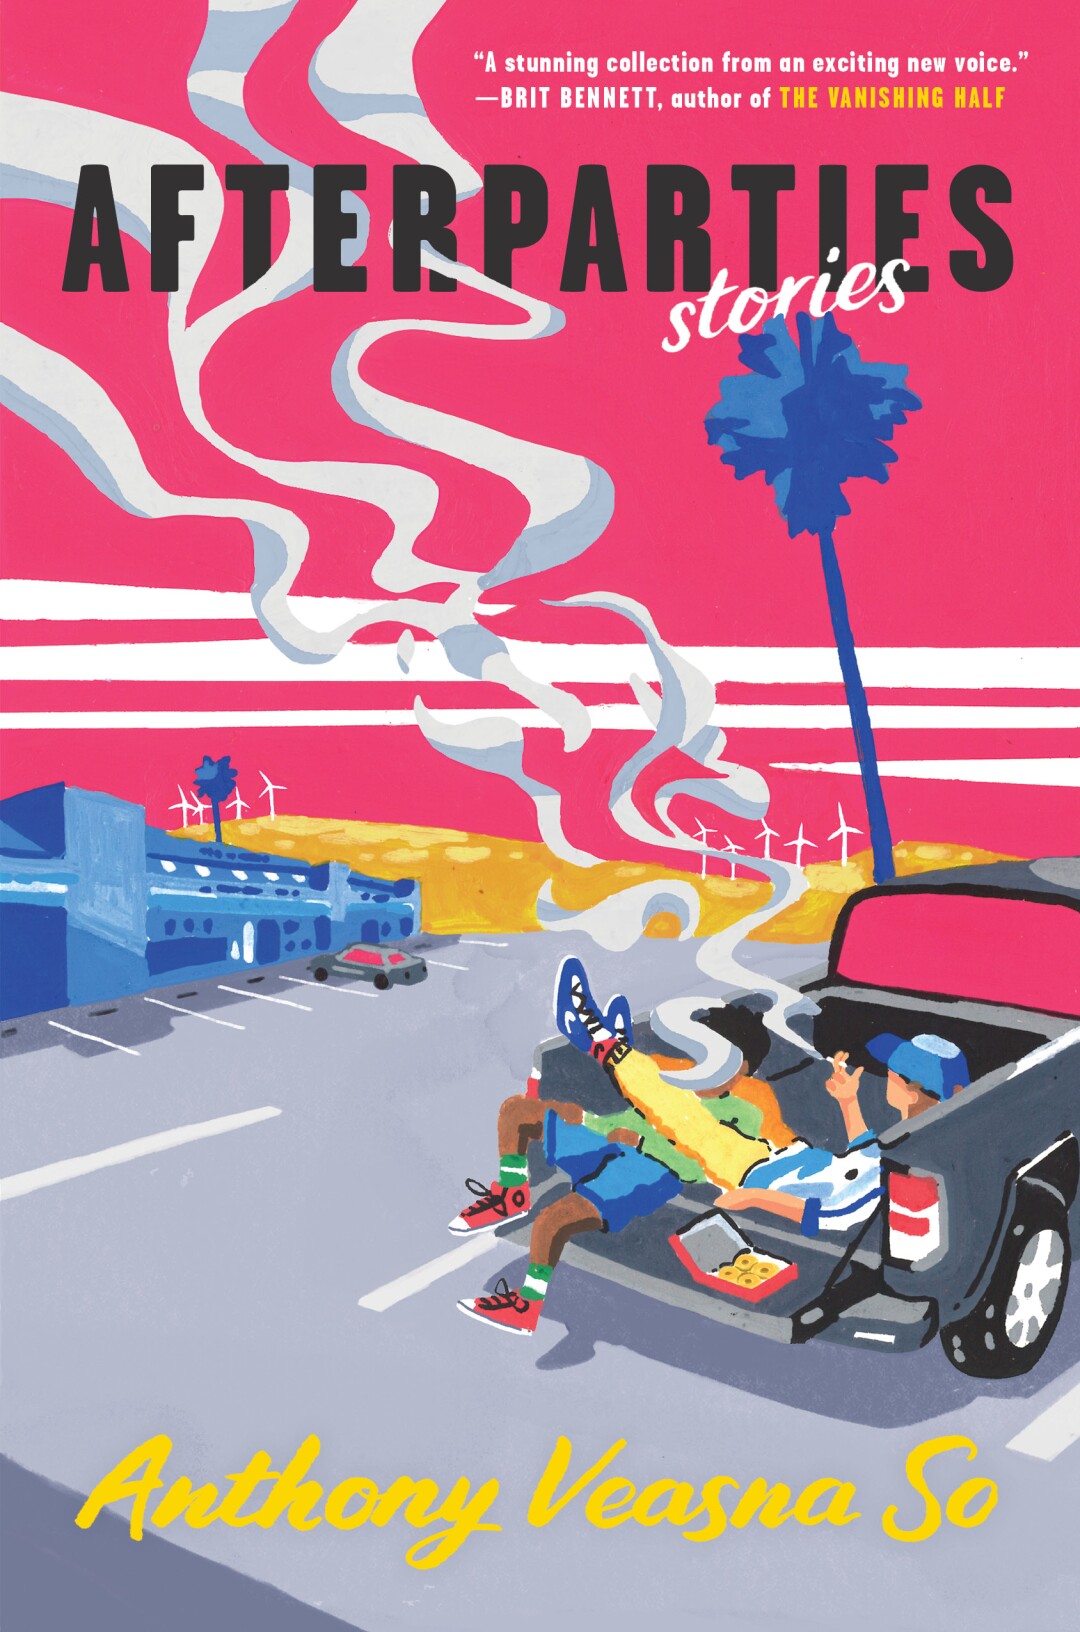 Two men smoke in the back of a truck on the cover of "Afterparties: stories," by Anthony Veasna So